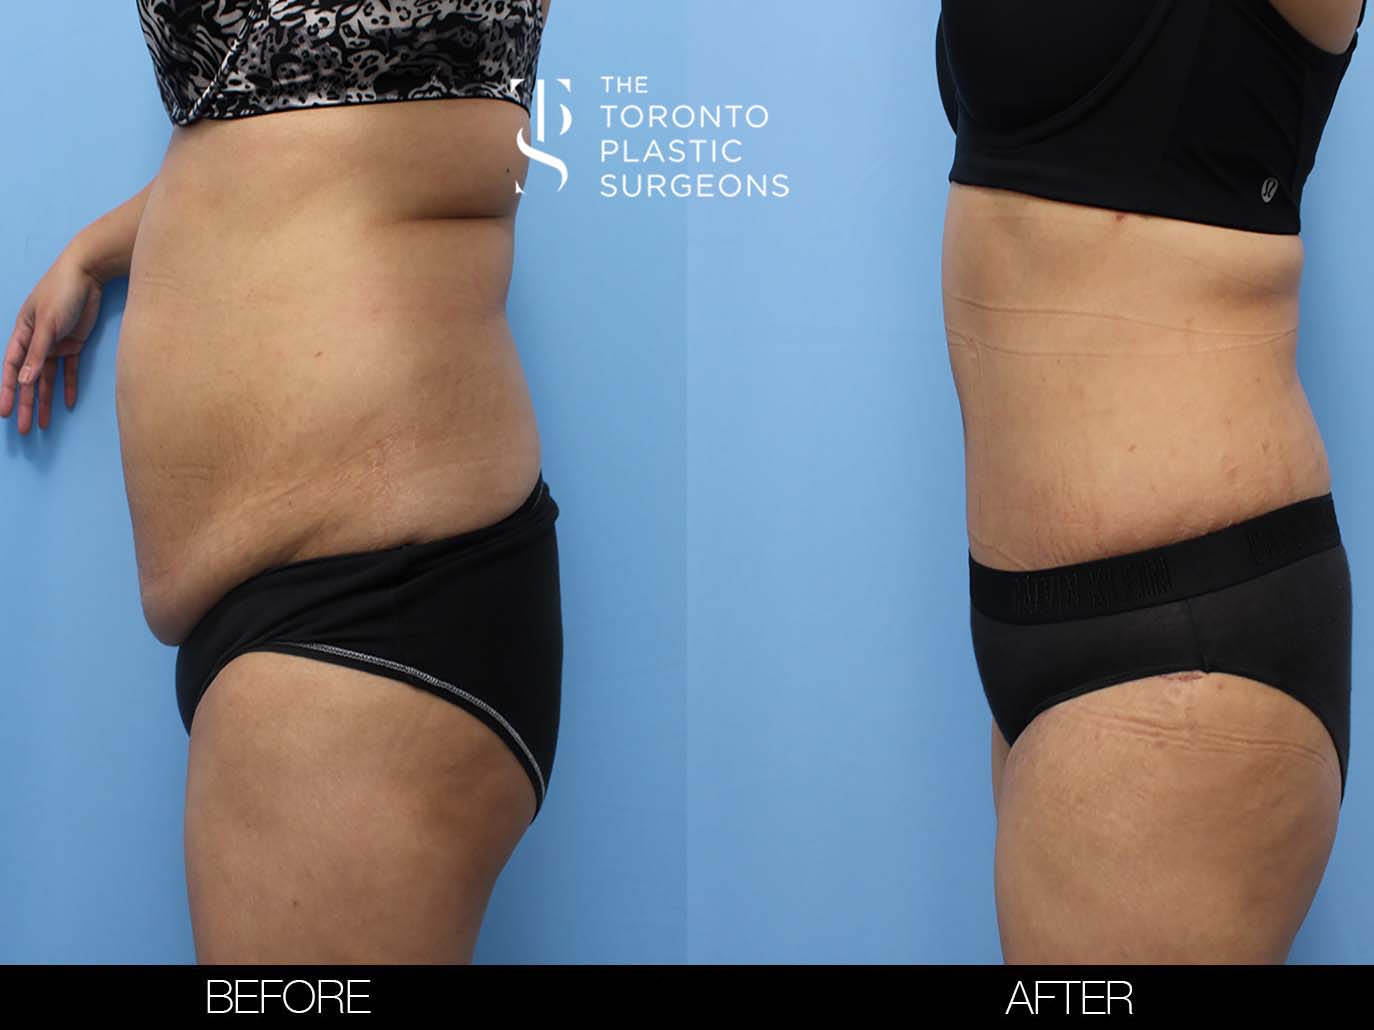 Compression Garments After a Tummy Tuck - Front Range Plastic Surgery